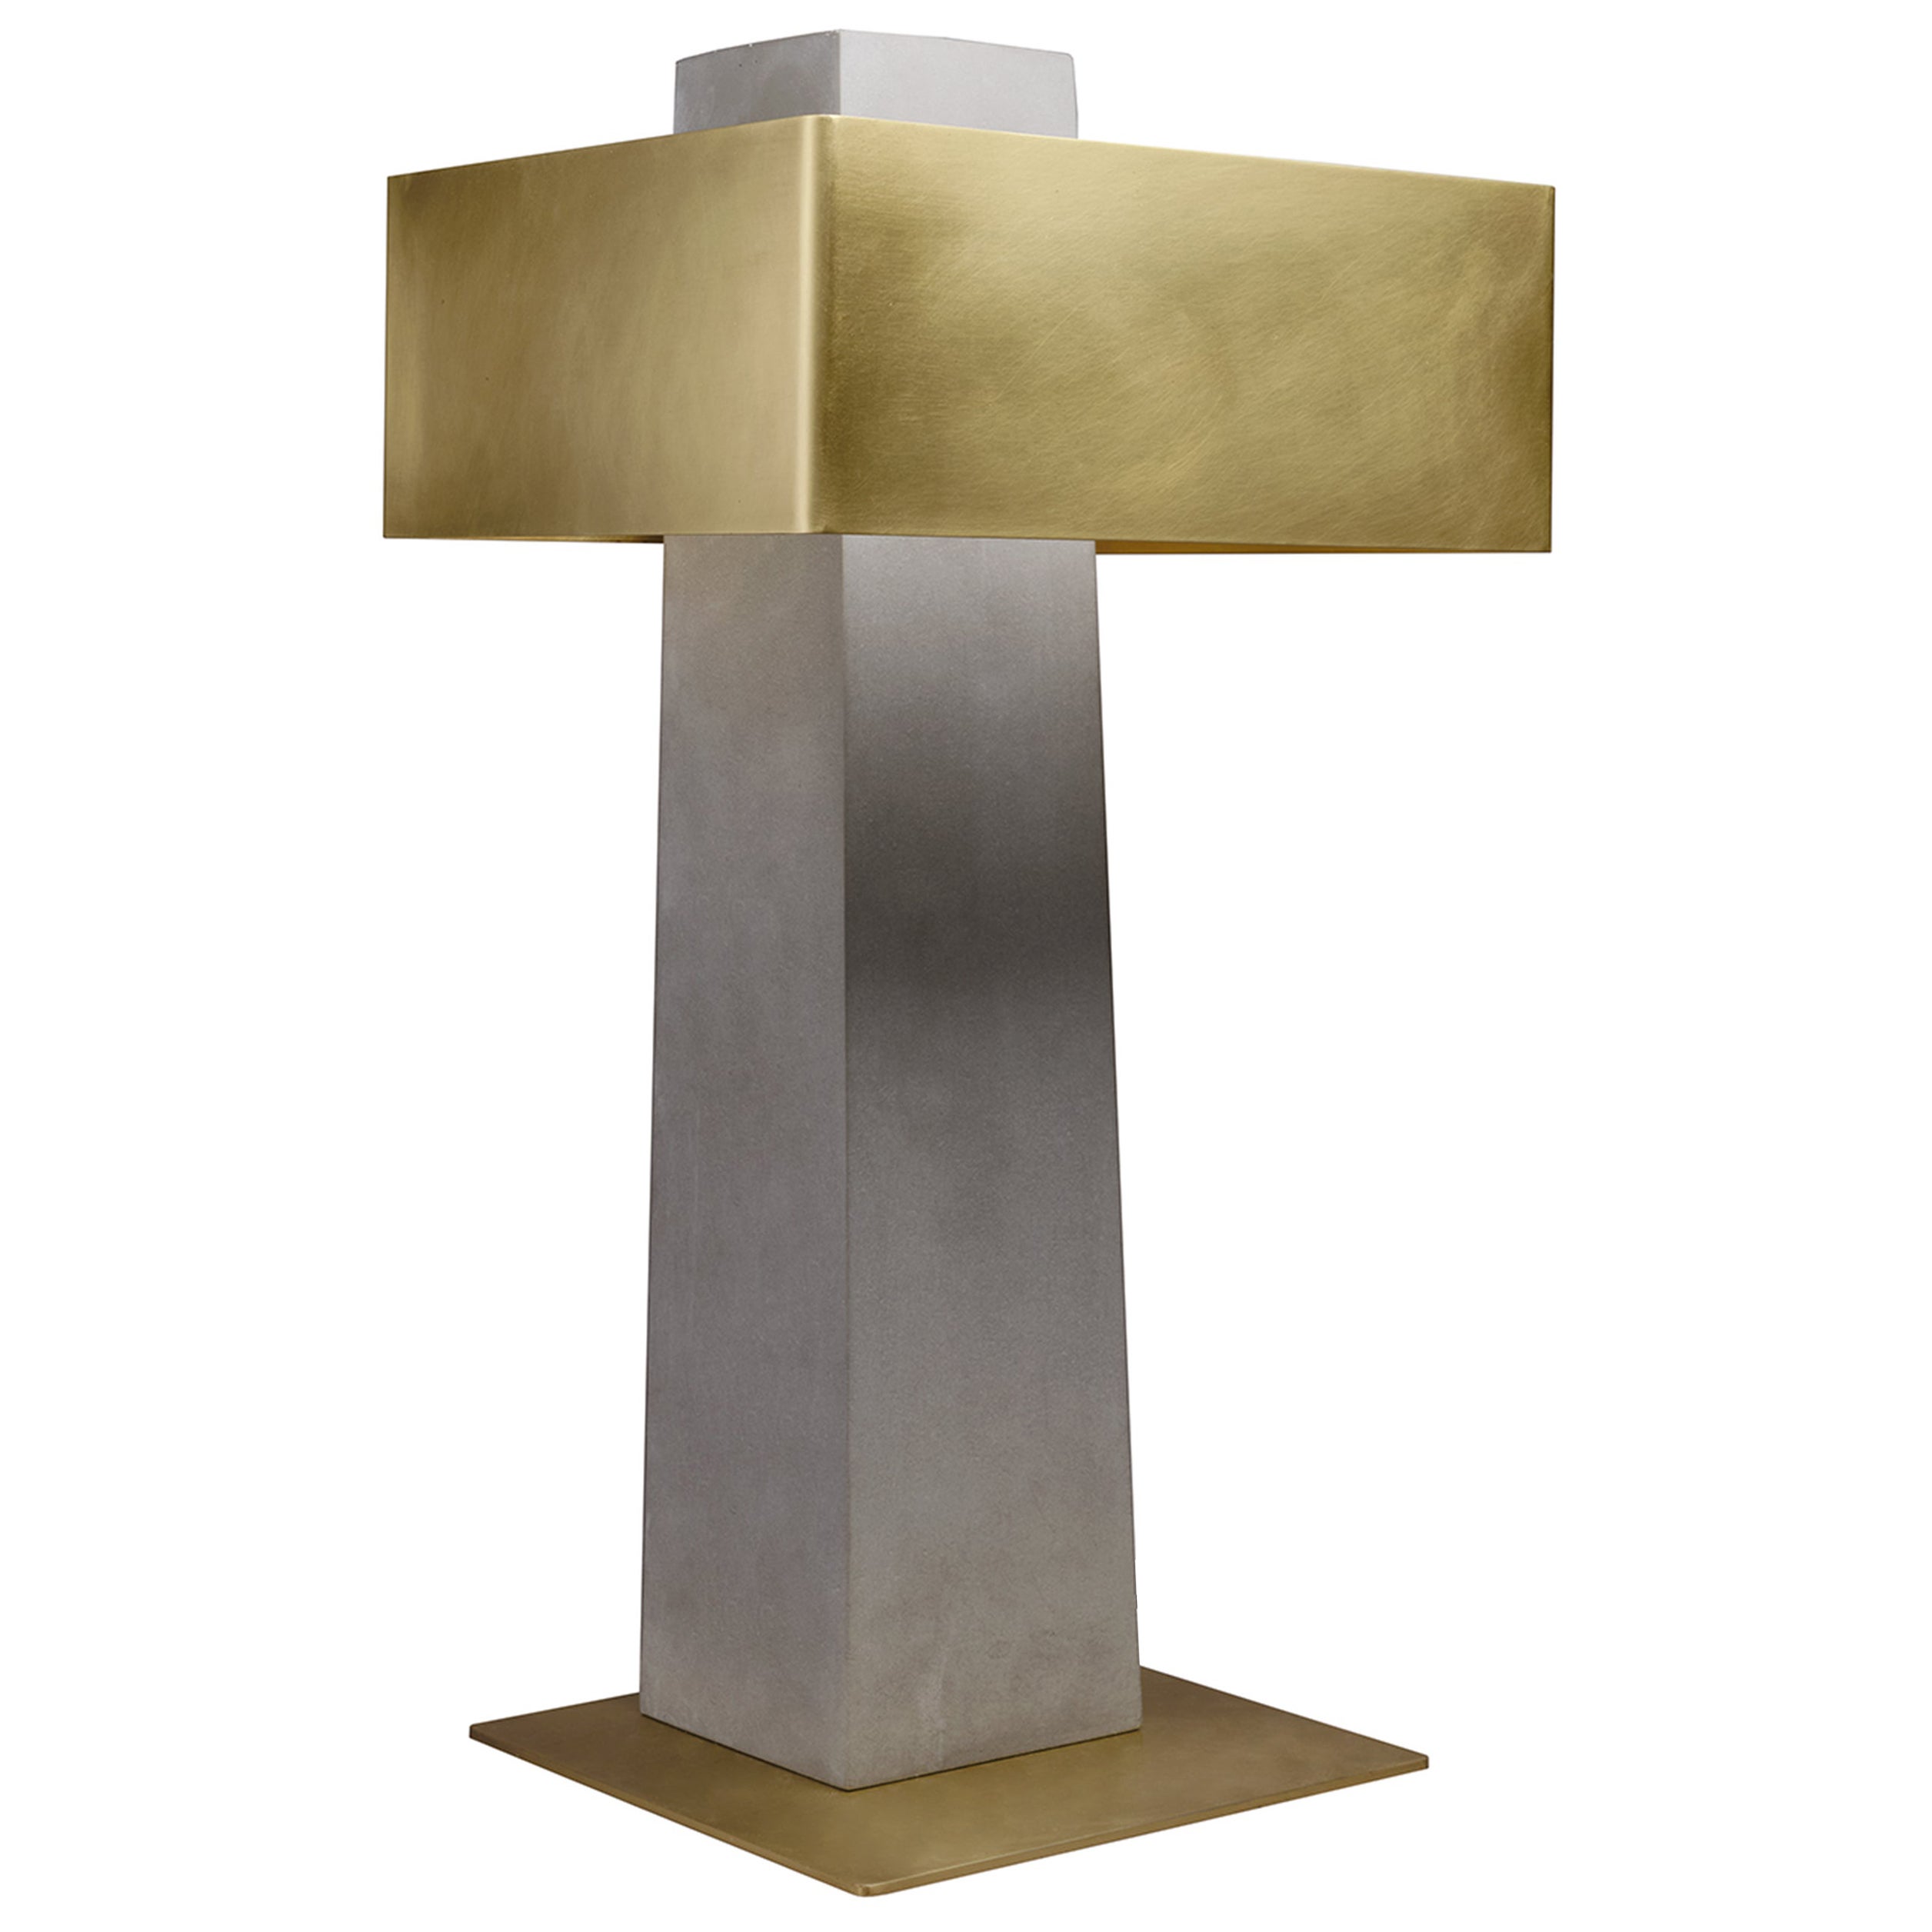 DCW Editions Iota Table Lamp in Gold Concrete & Steel by Clément Cauvet